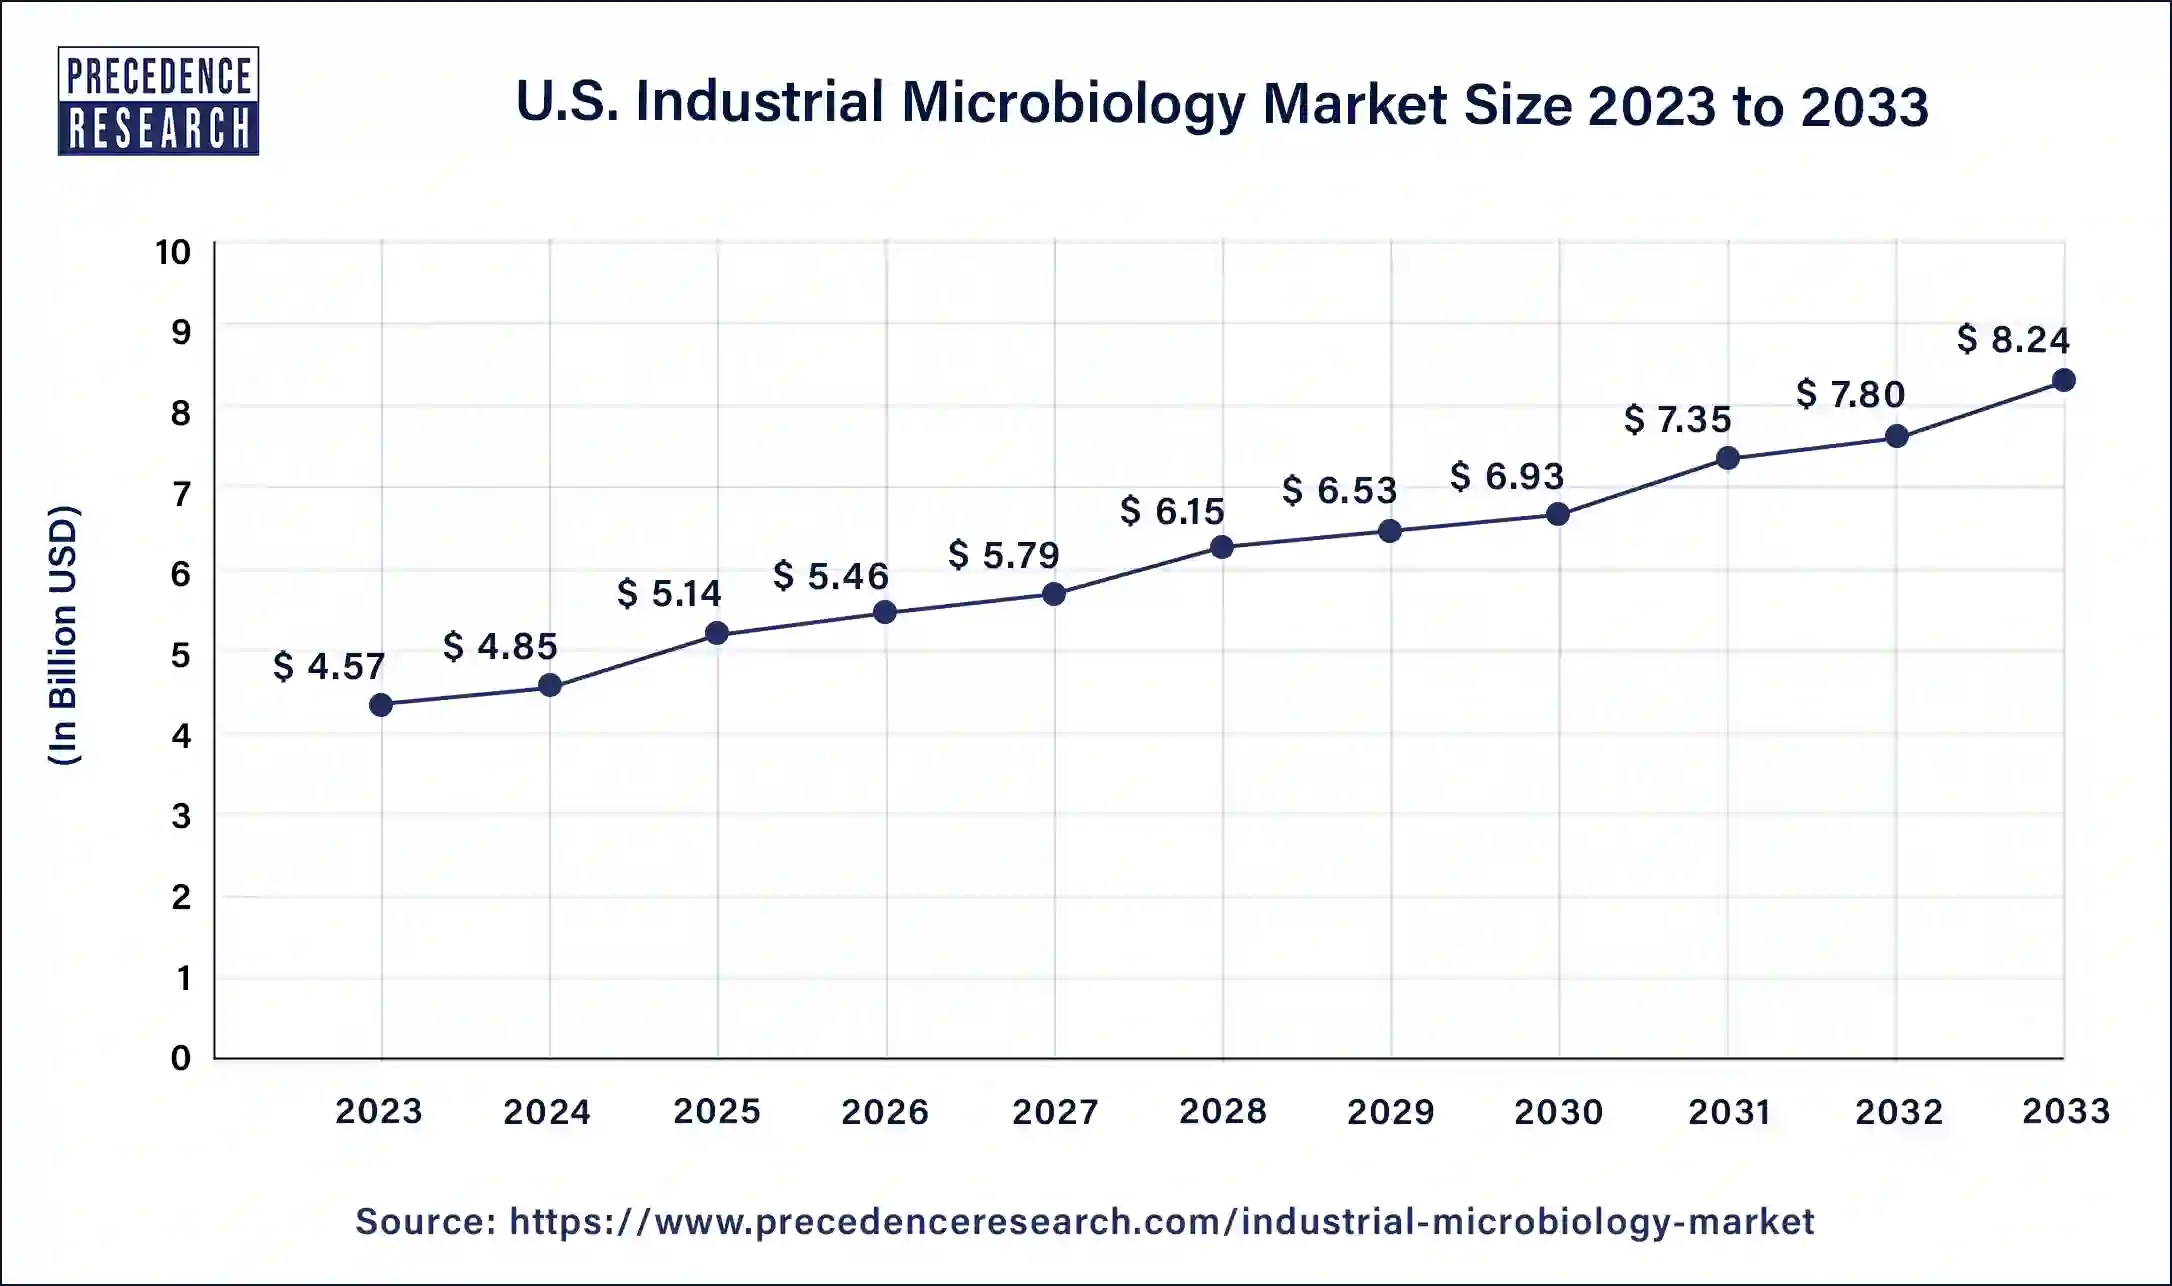 U.S. Industrial Microbiology Market Size 2024 to 2033